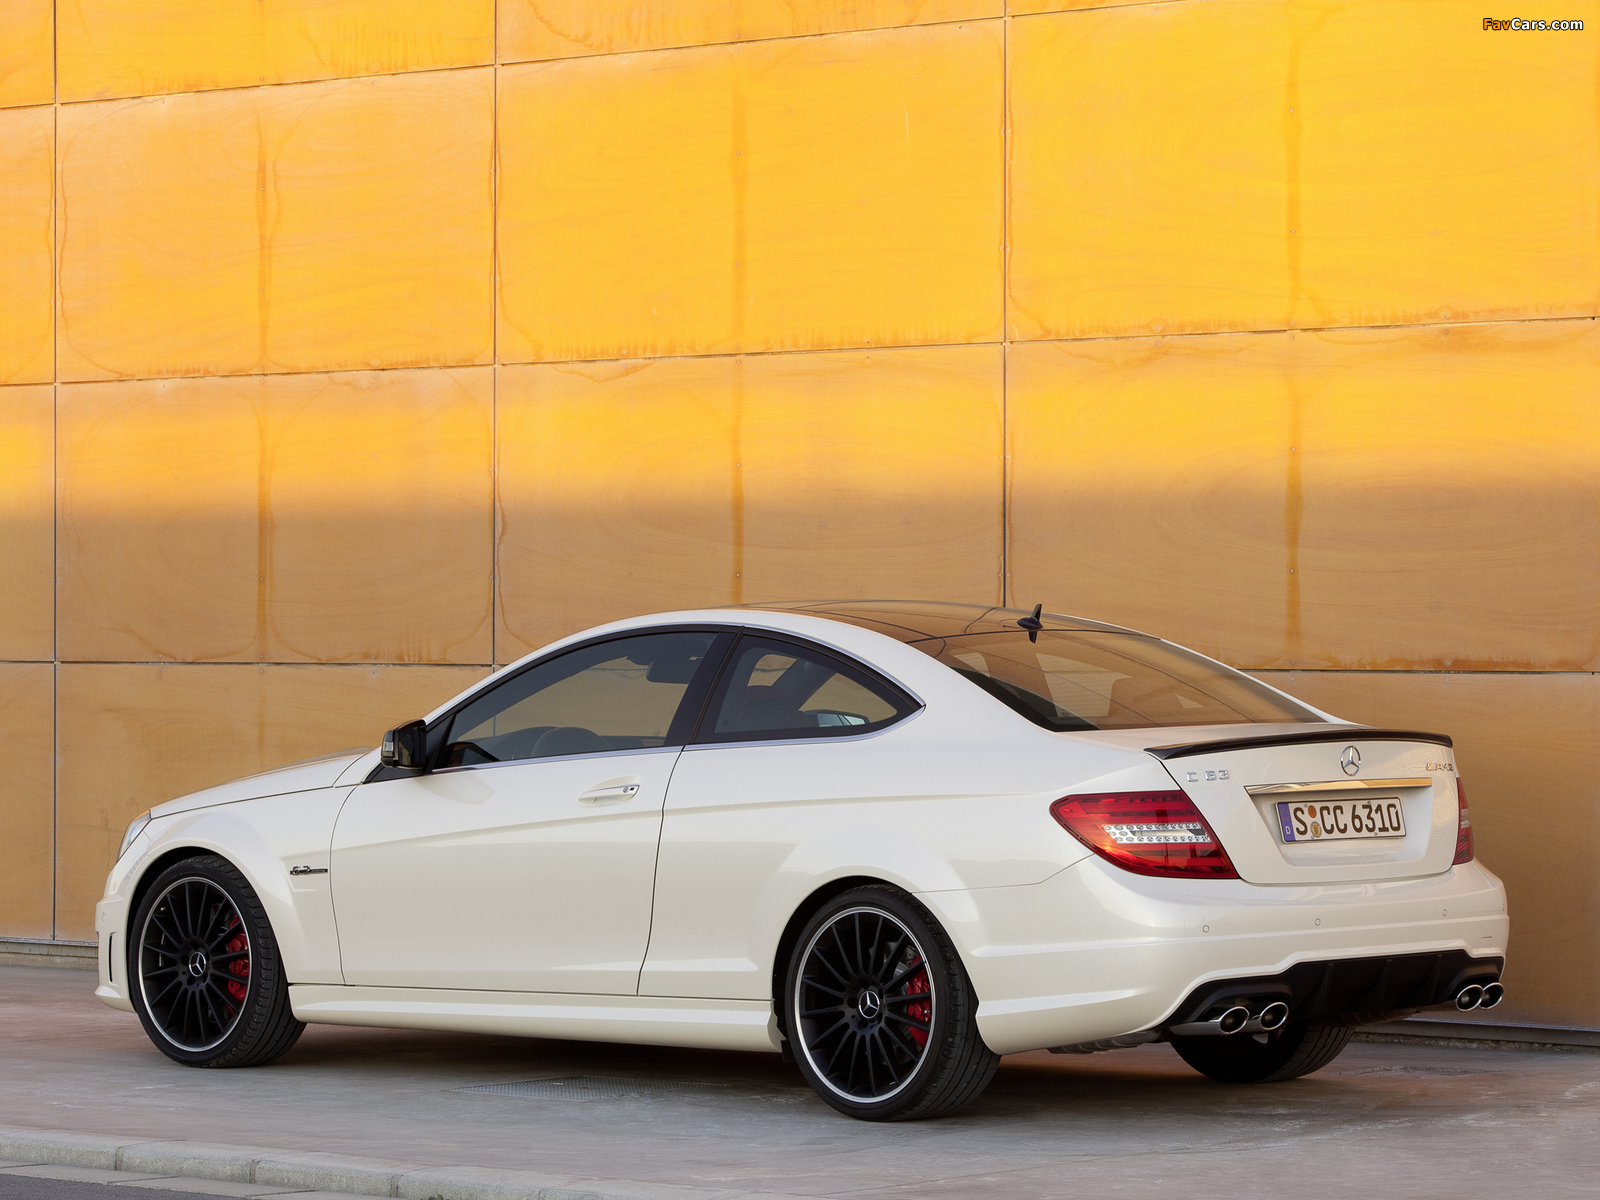 Mercedes-Benz C 63 AMG Coupe (C204) 2011 pictures (1600 x 1200)